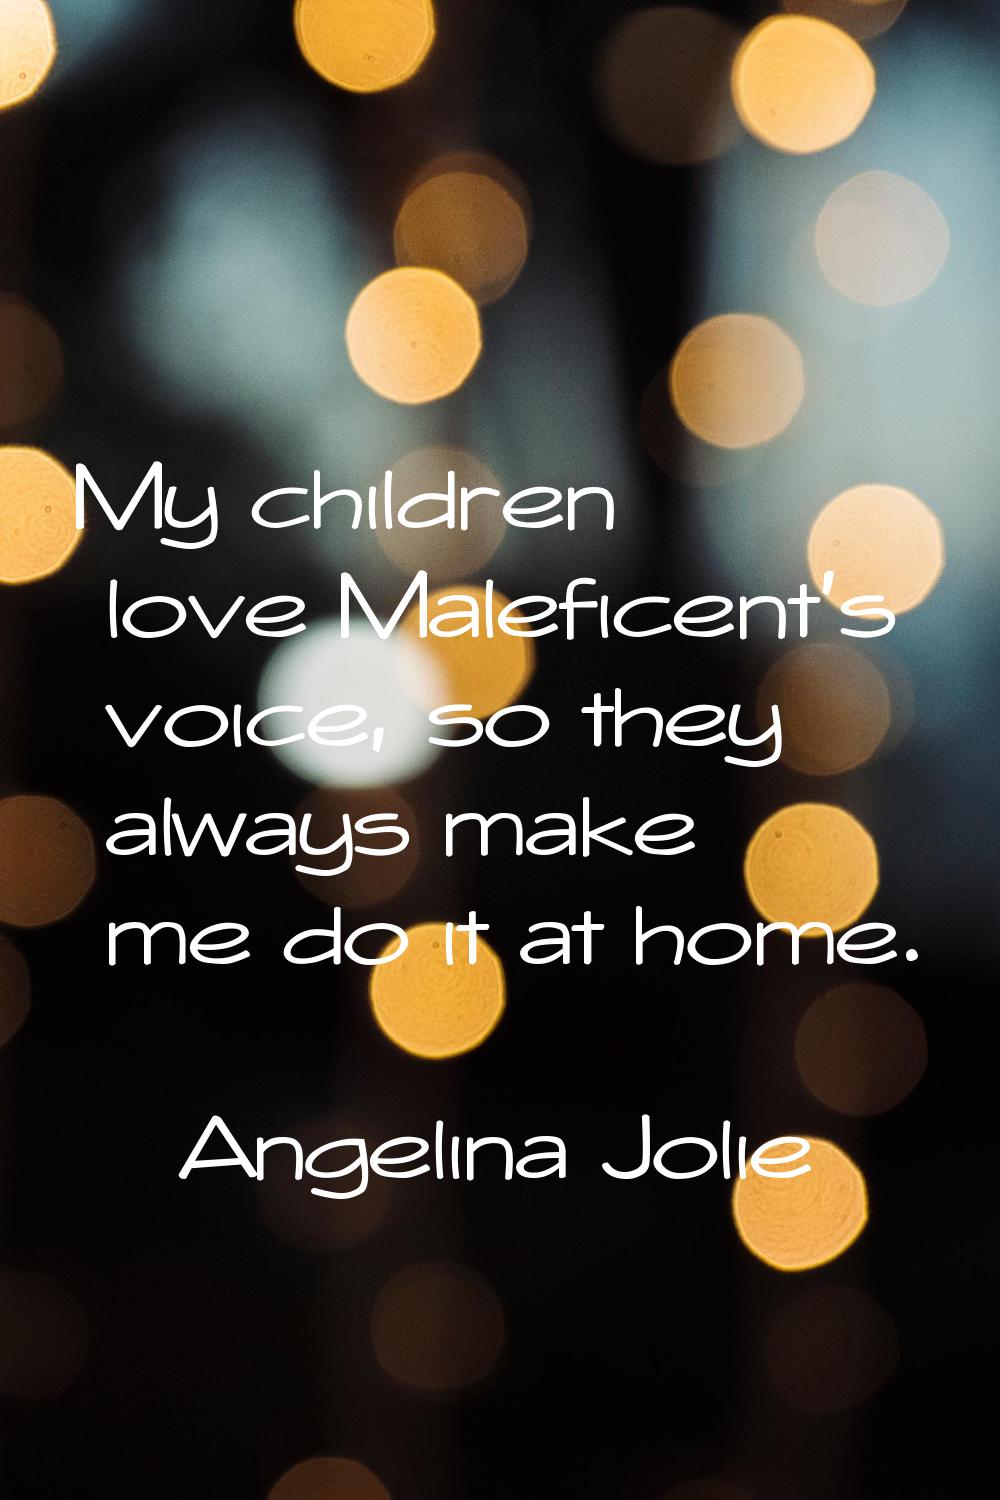 My children love Maleficent's voice, so they always make me do it at home.